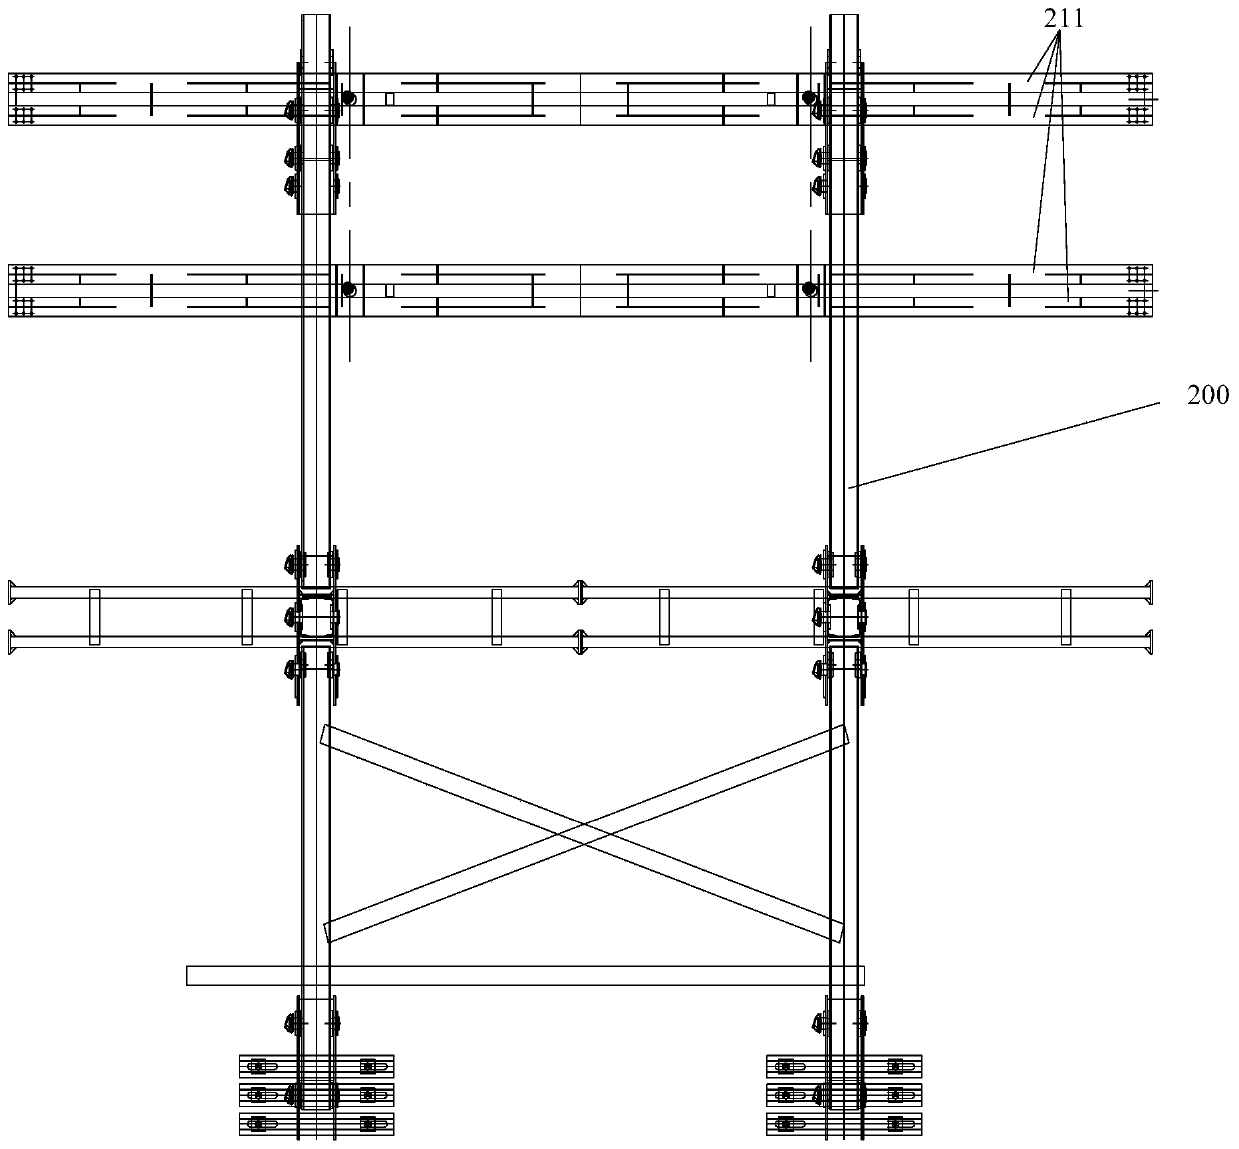 Synchronous lifting system and method for large-span continuous box girder closure